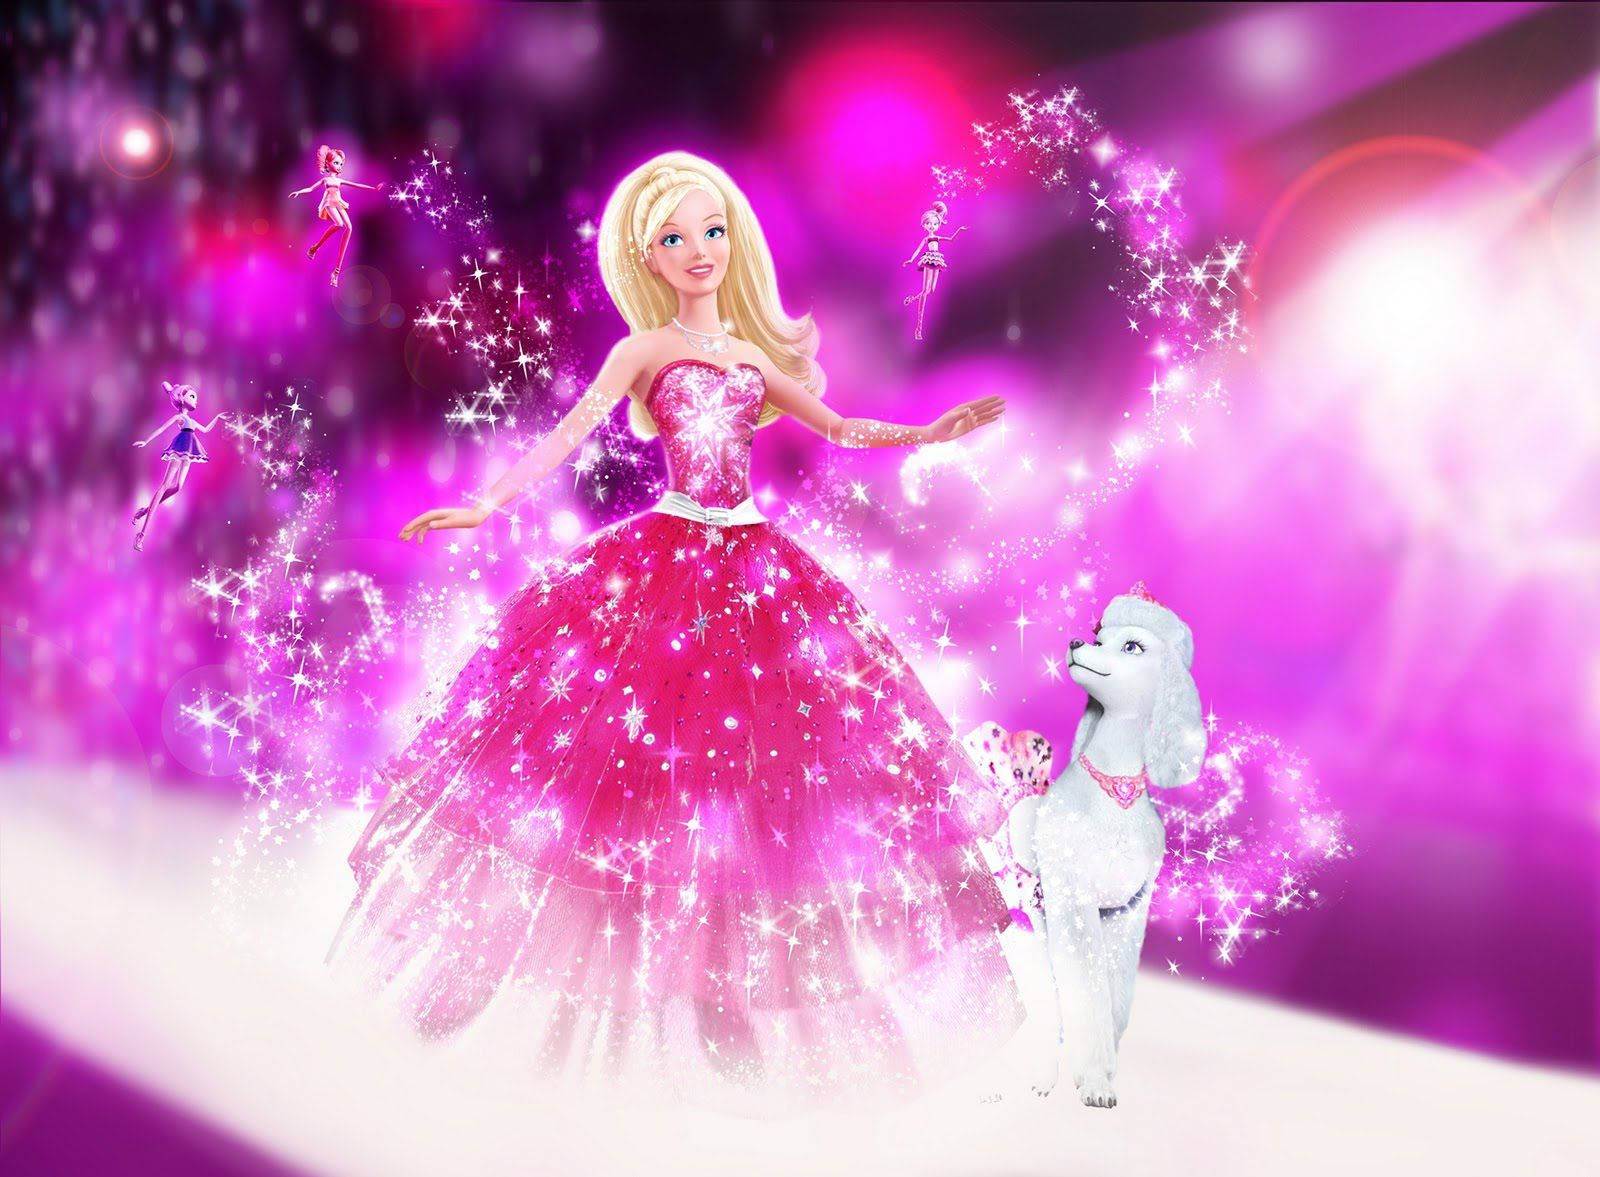 Barbie Wallpapers very beautiful and much Interesting.Now you can